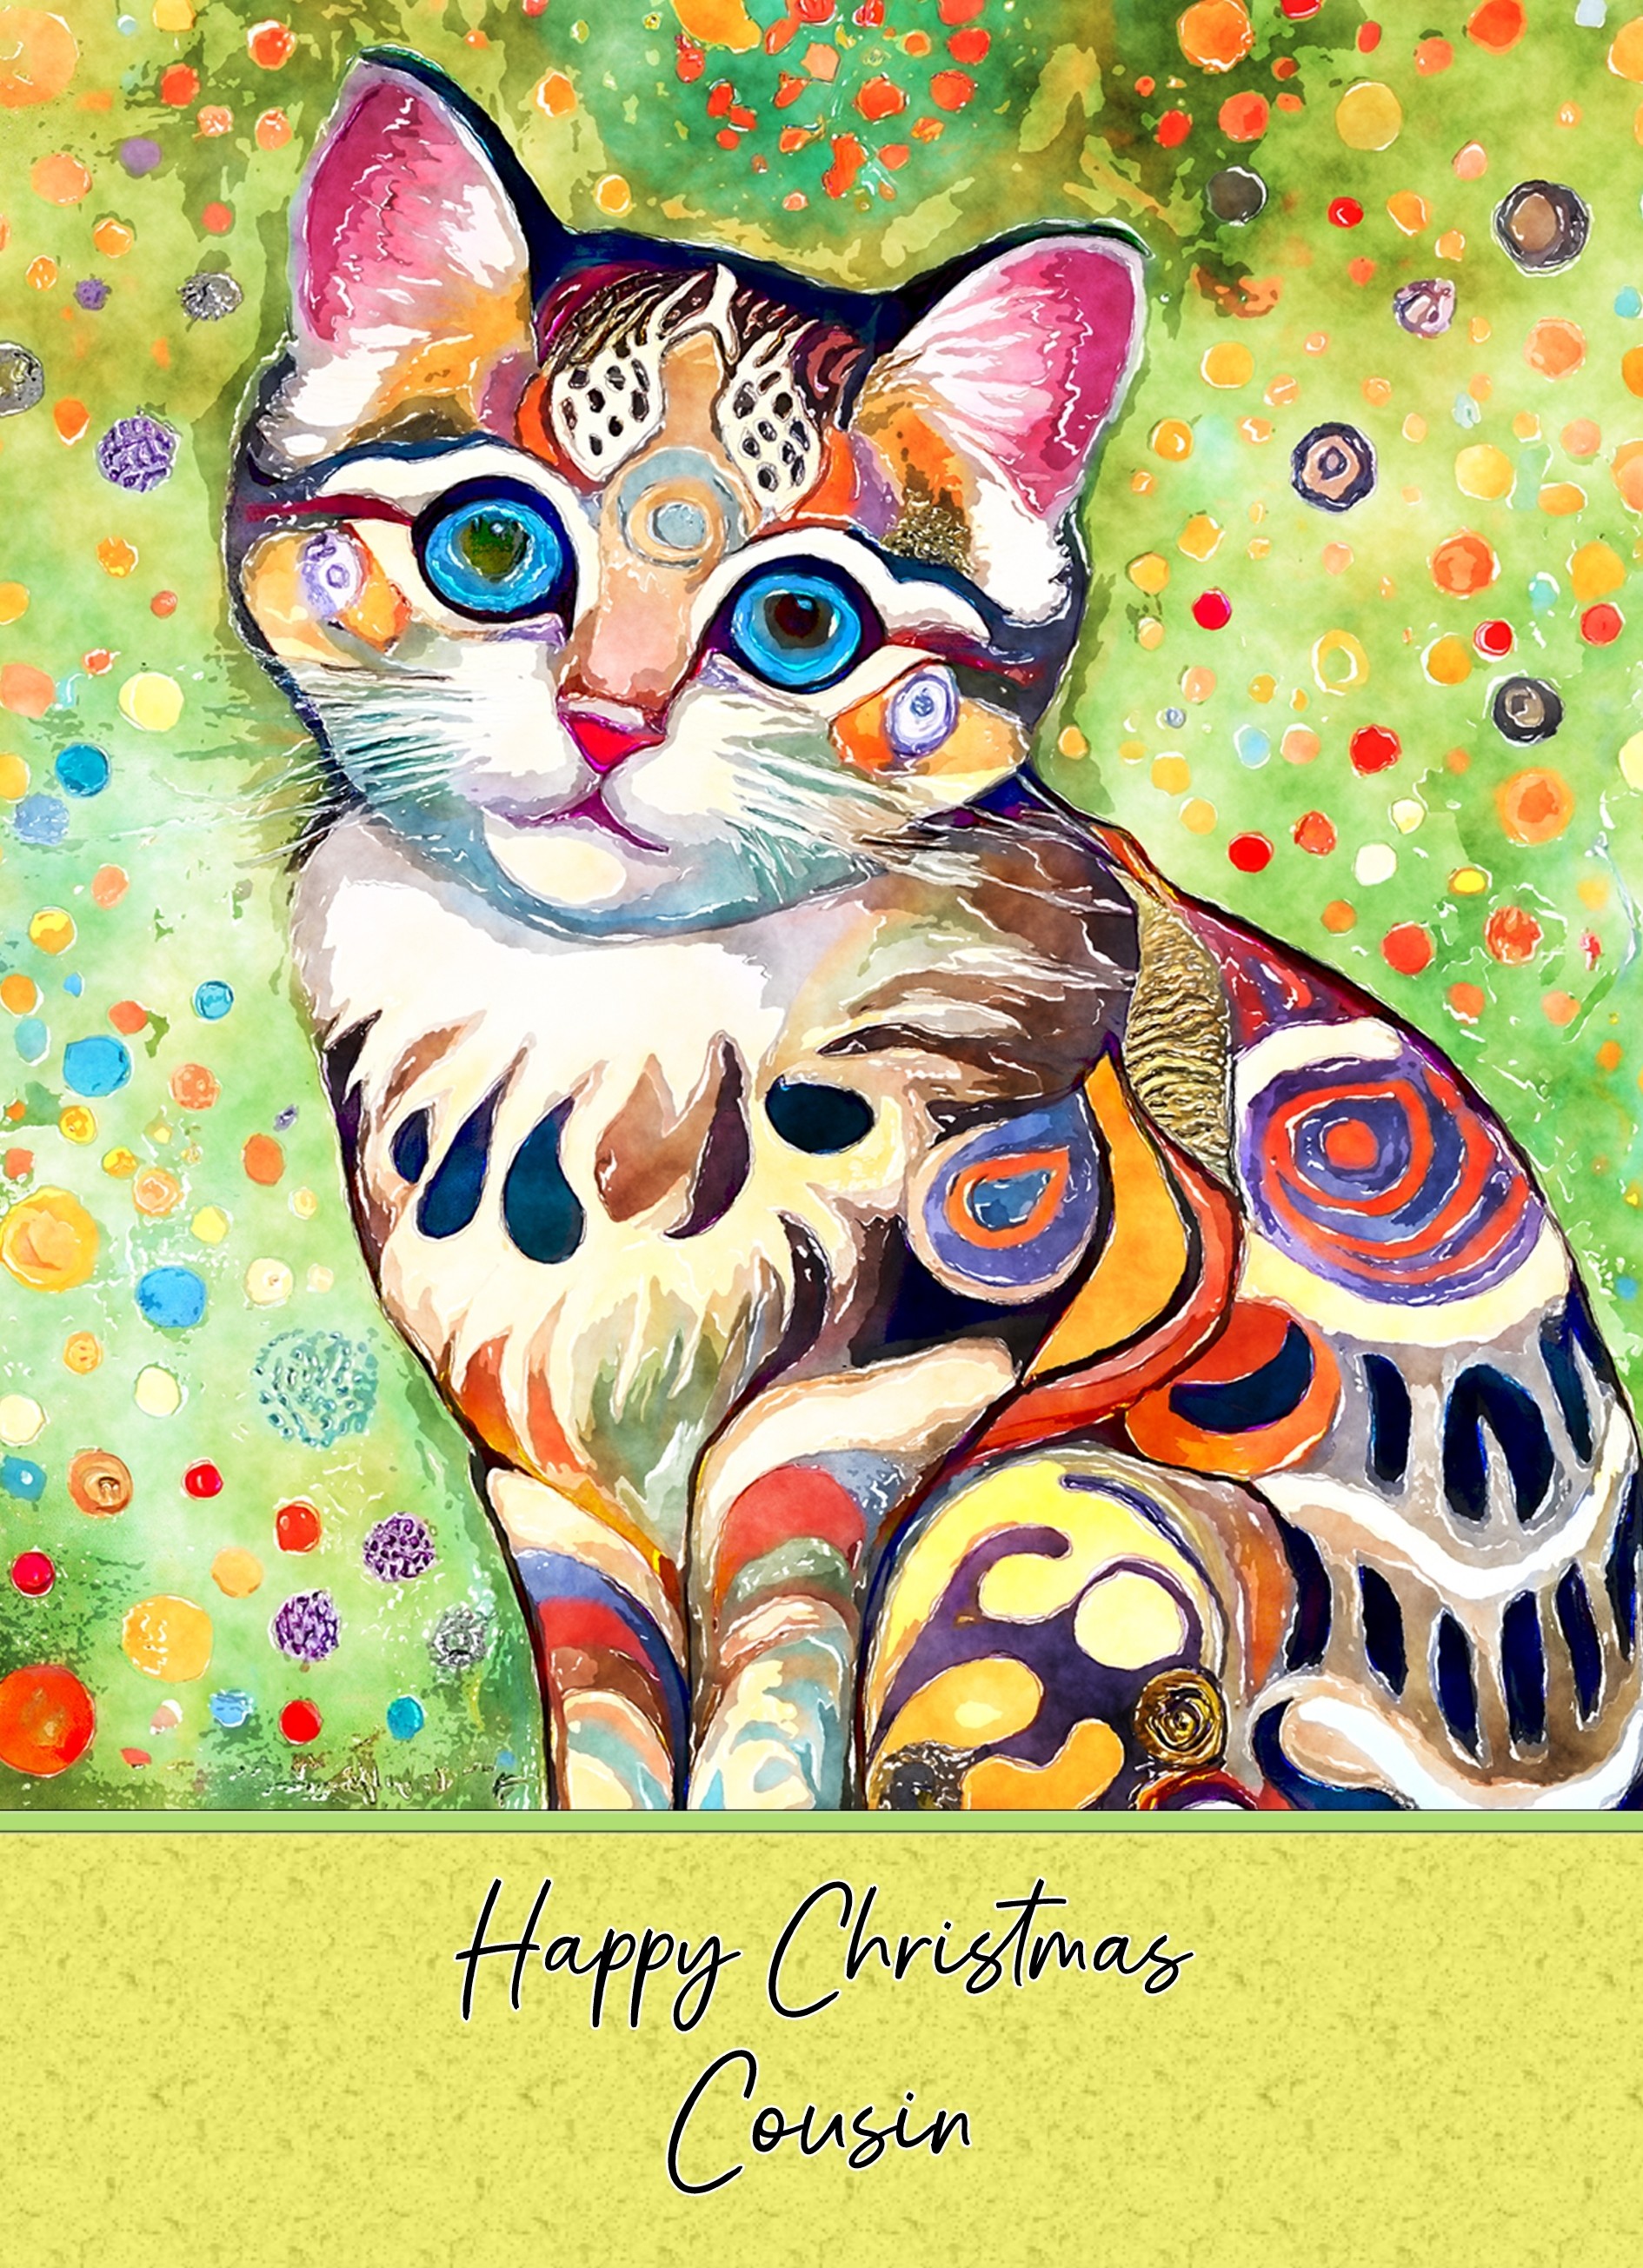 Christmas Card For Cousin (Cat Art Painting)